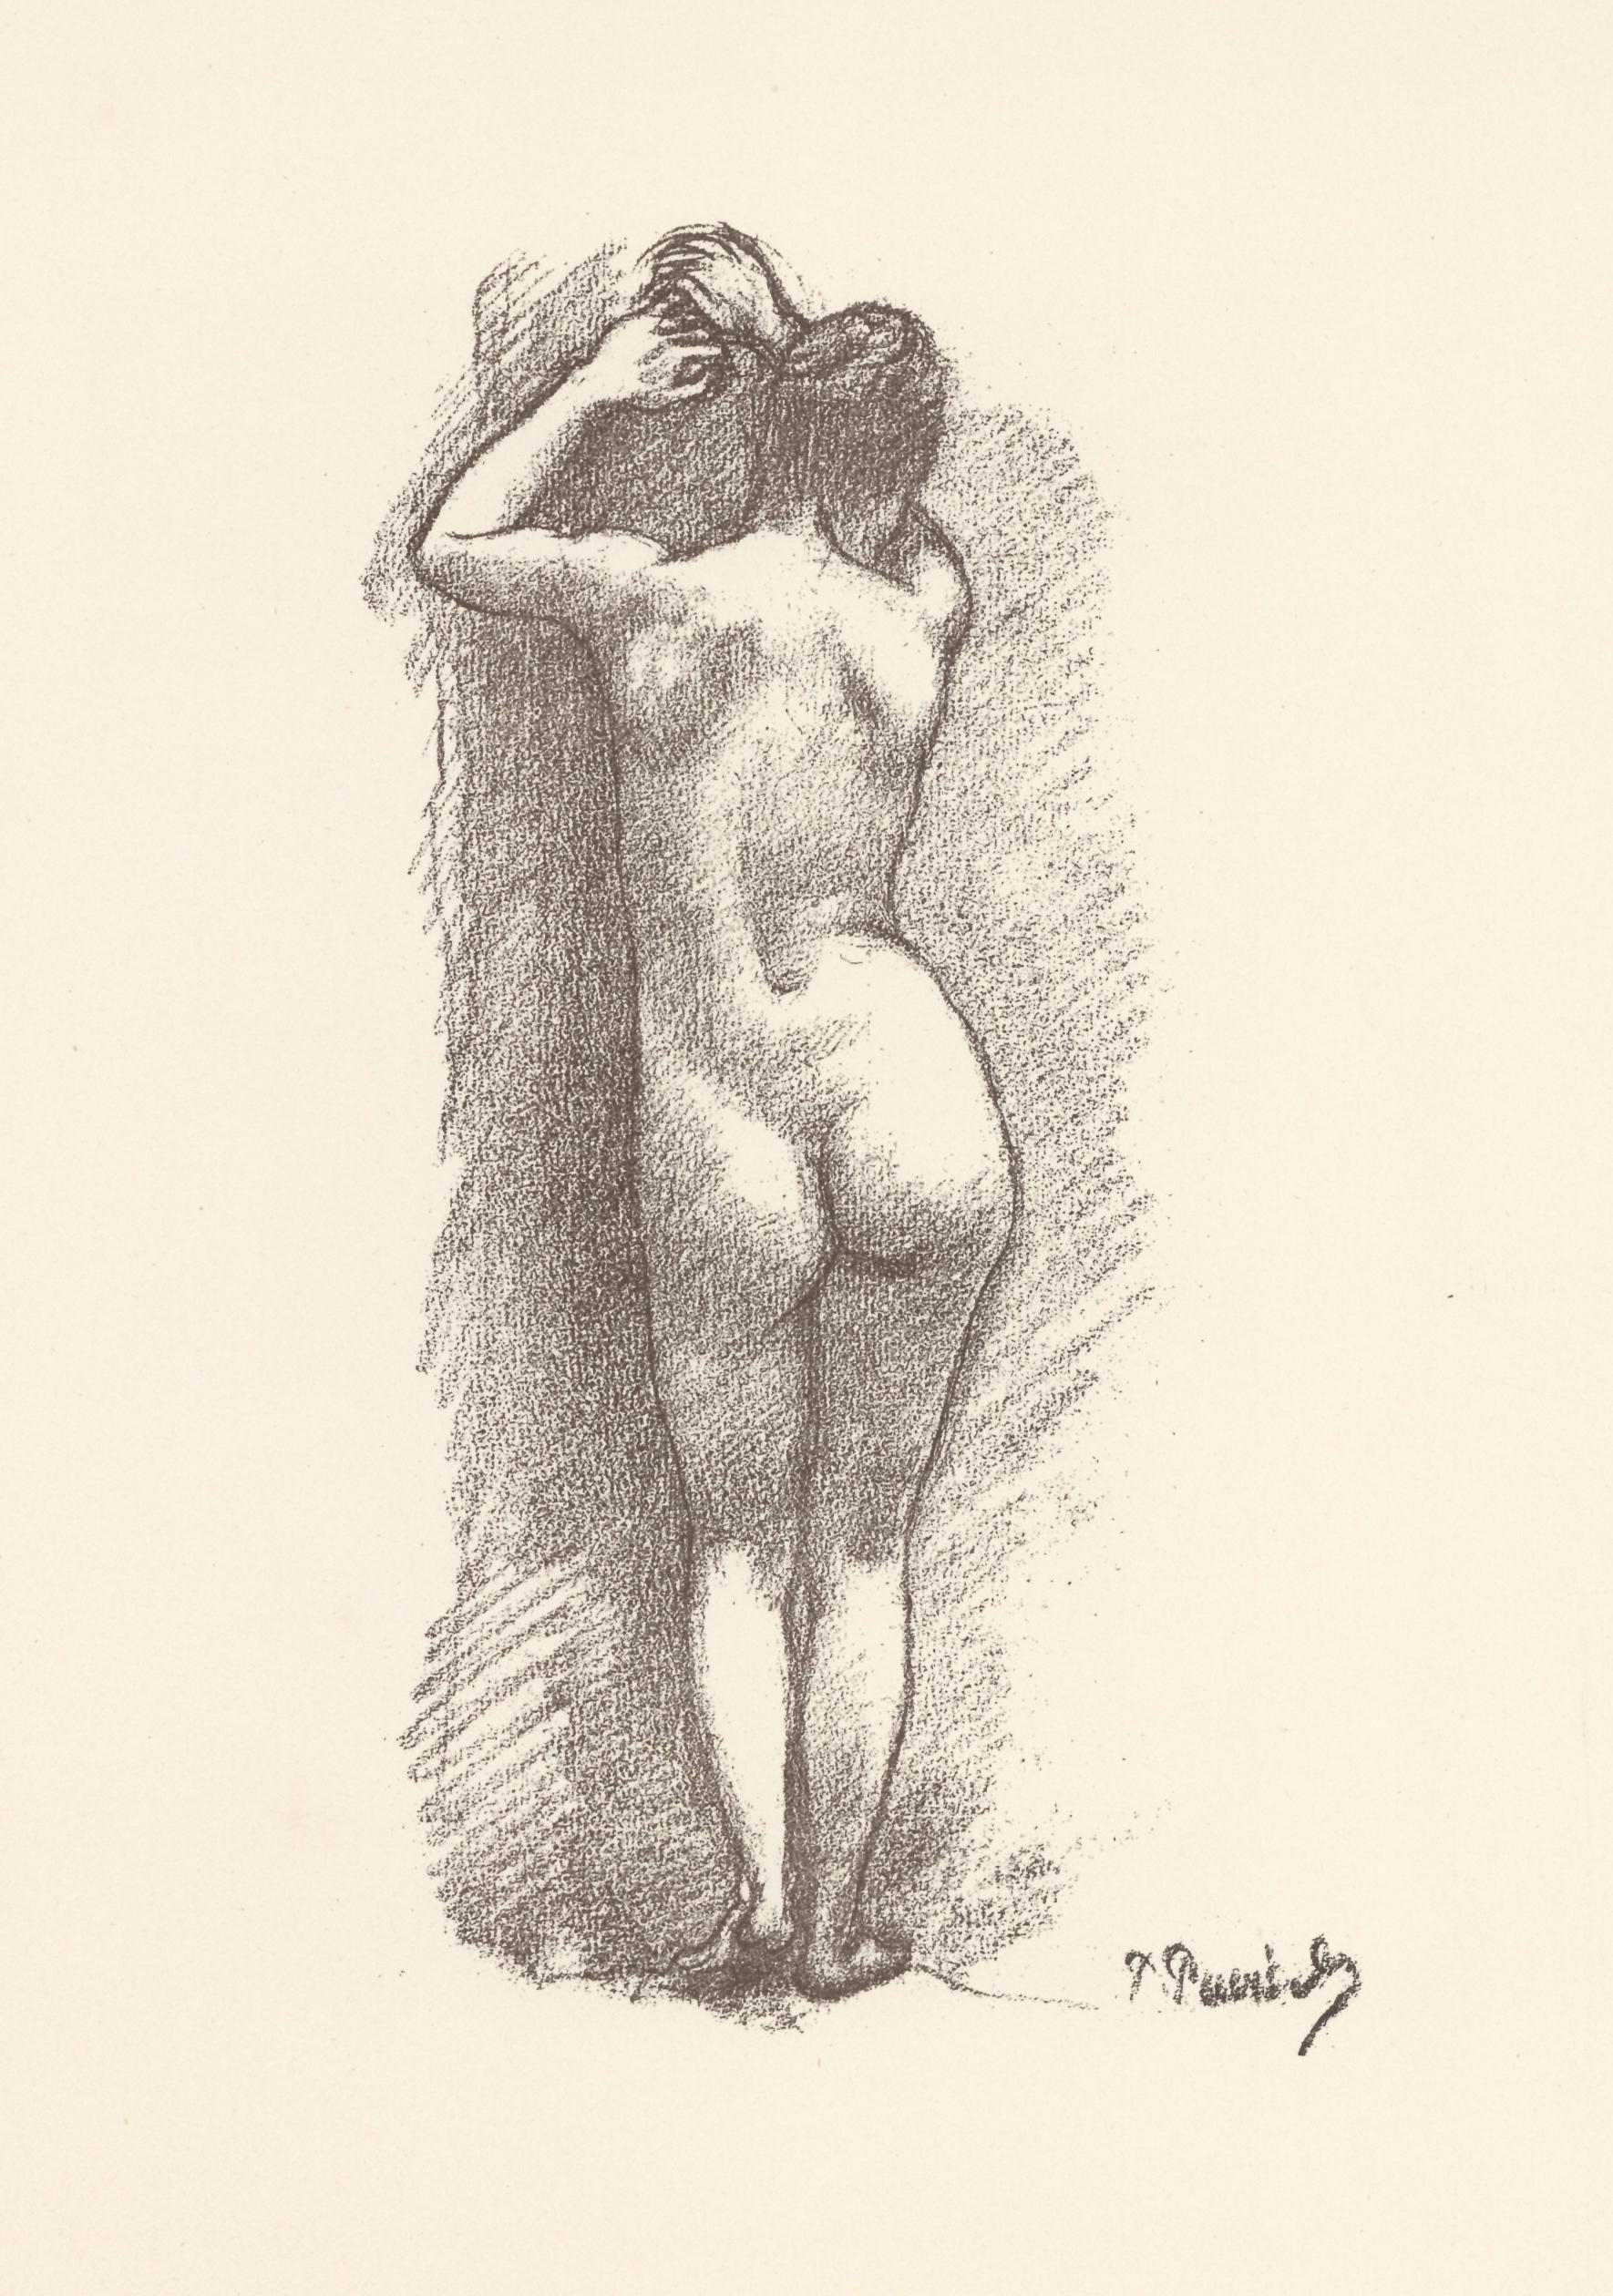 Medium: lithograph. This impression is from the rare 1897 portfolio "Art et Nature" by Leon Roger-Miles, published in Paris by Boudet in an edition of 525. Printed on Marais wove paper, the sheet size is 12 3/4 x 9 1/2 inches (325 x 238 mm). Signed